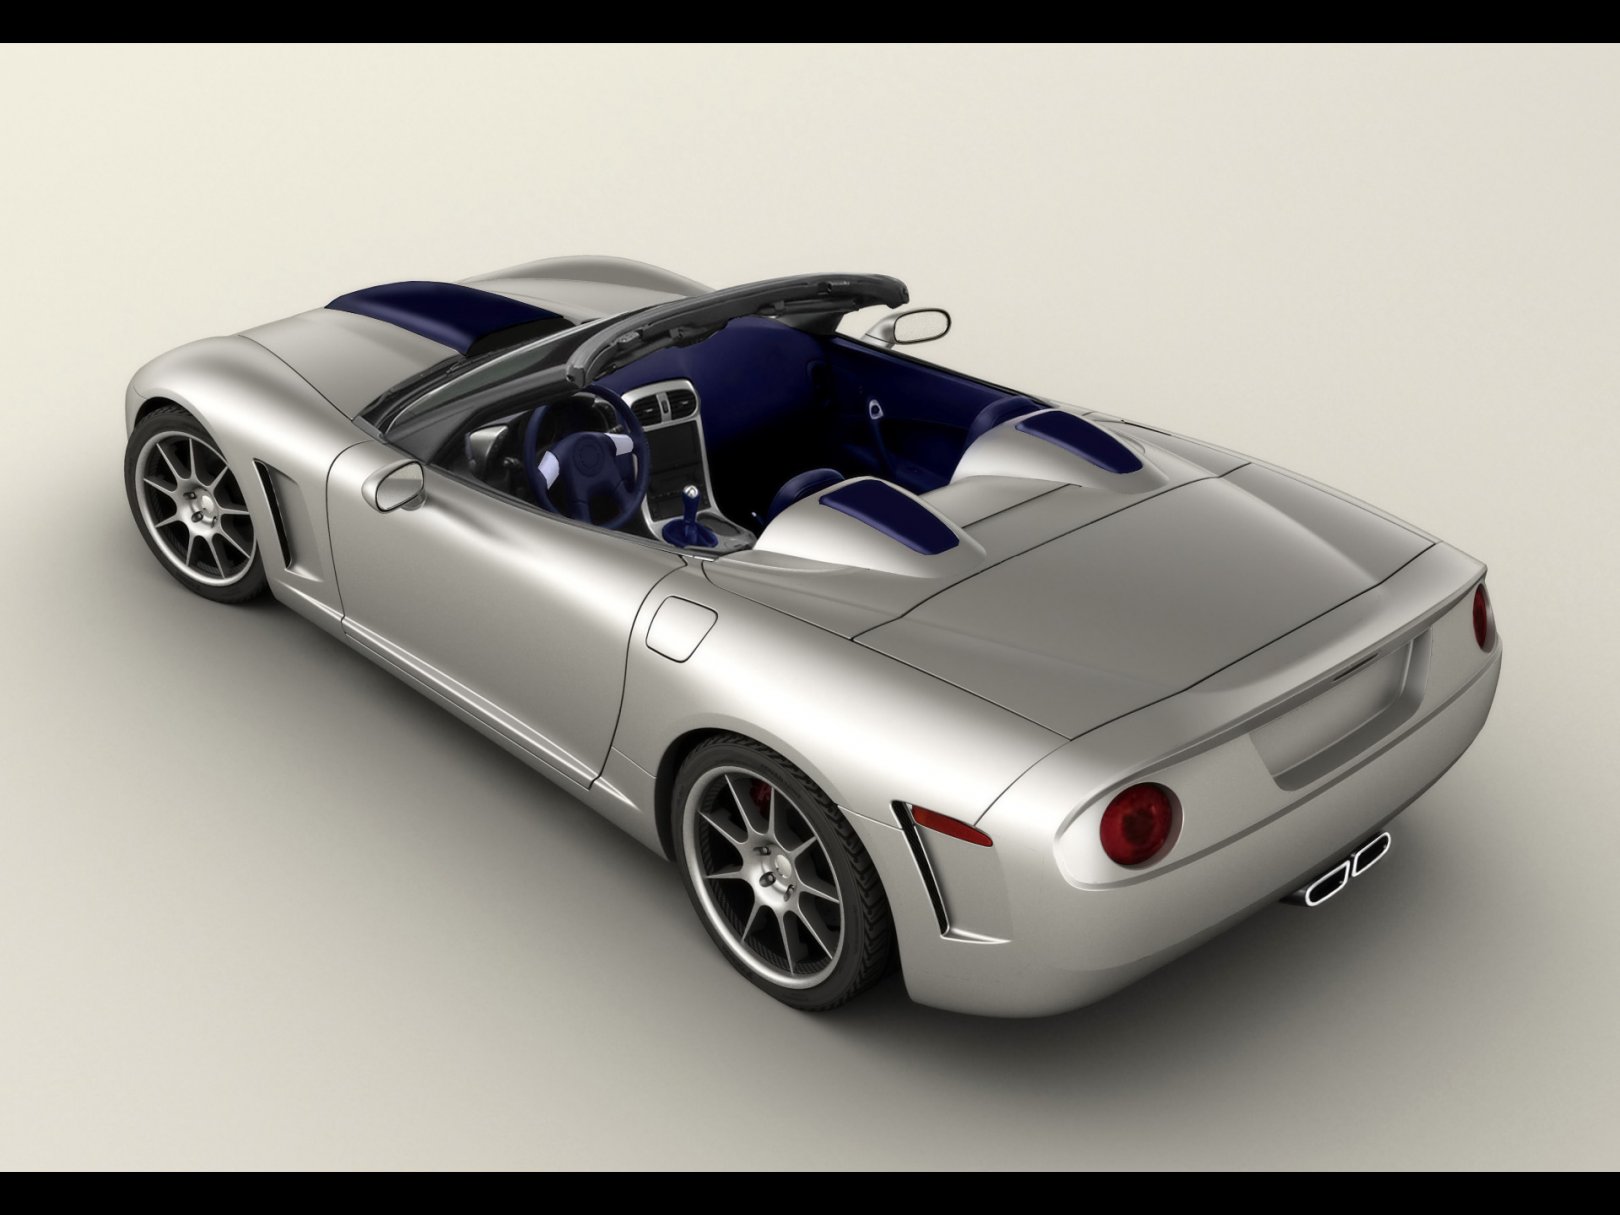 Foto: Callaway C16 Cabrio based on Chevrolet Corvette Rear And Side Top (2007)